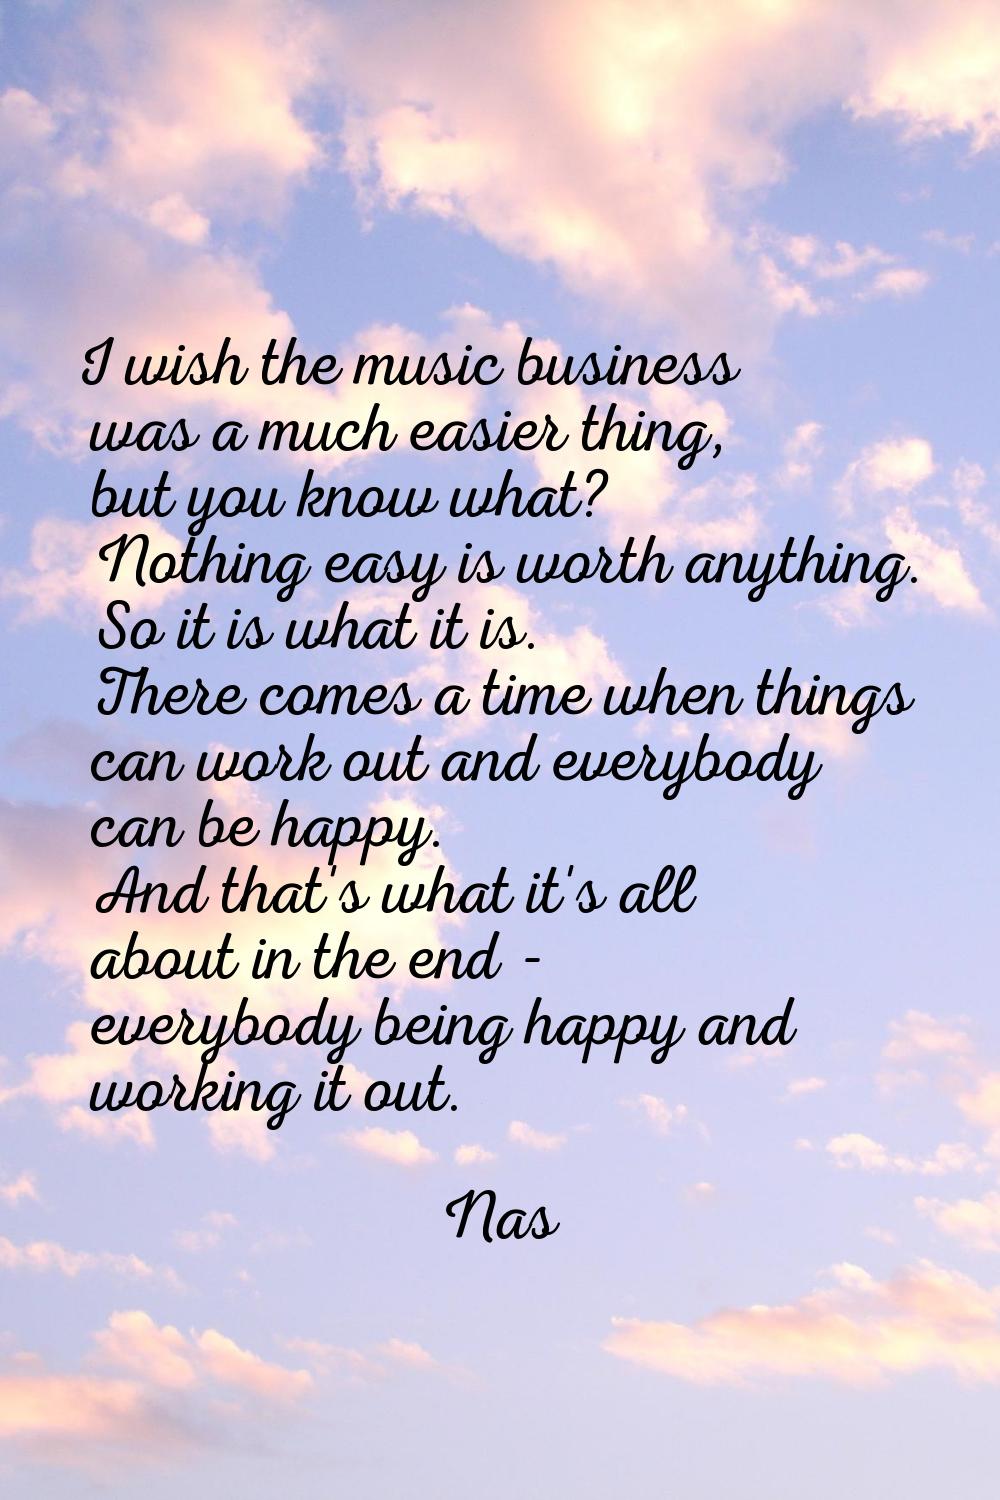 I wish the music business was a much easier thing, but you know what? Nothing easy is worth anythin